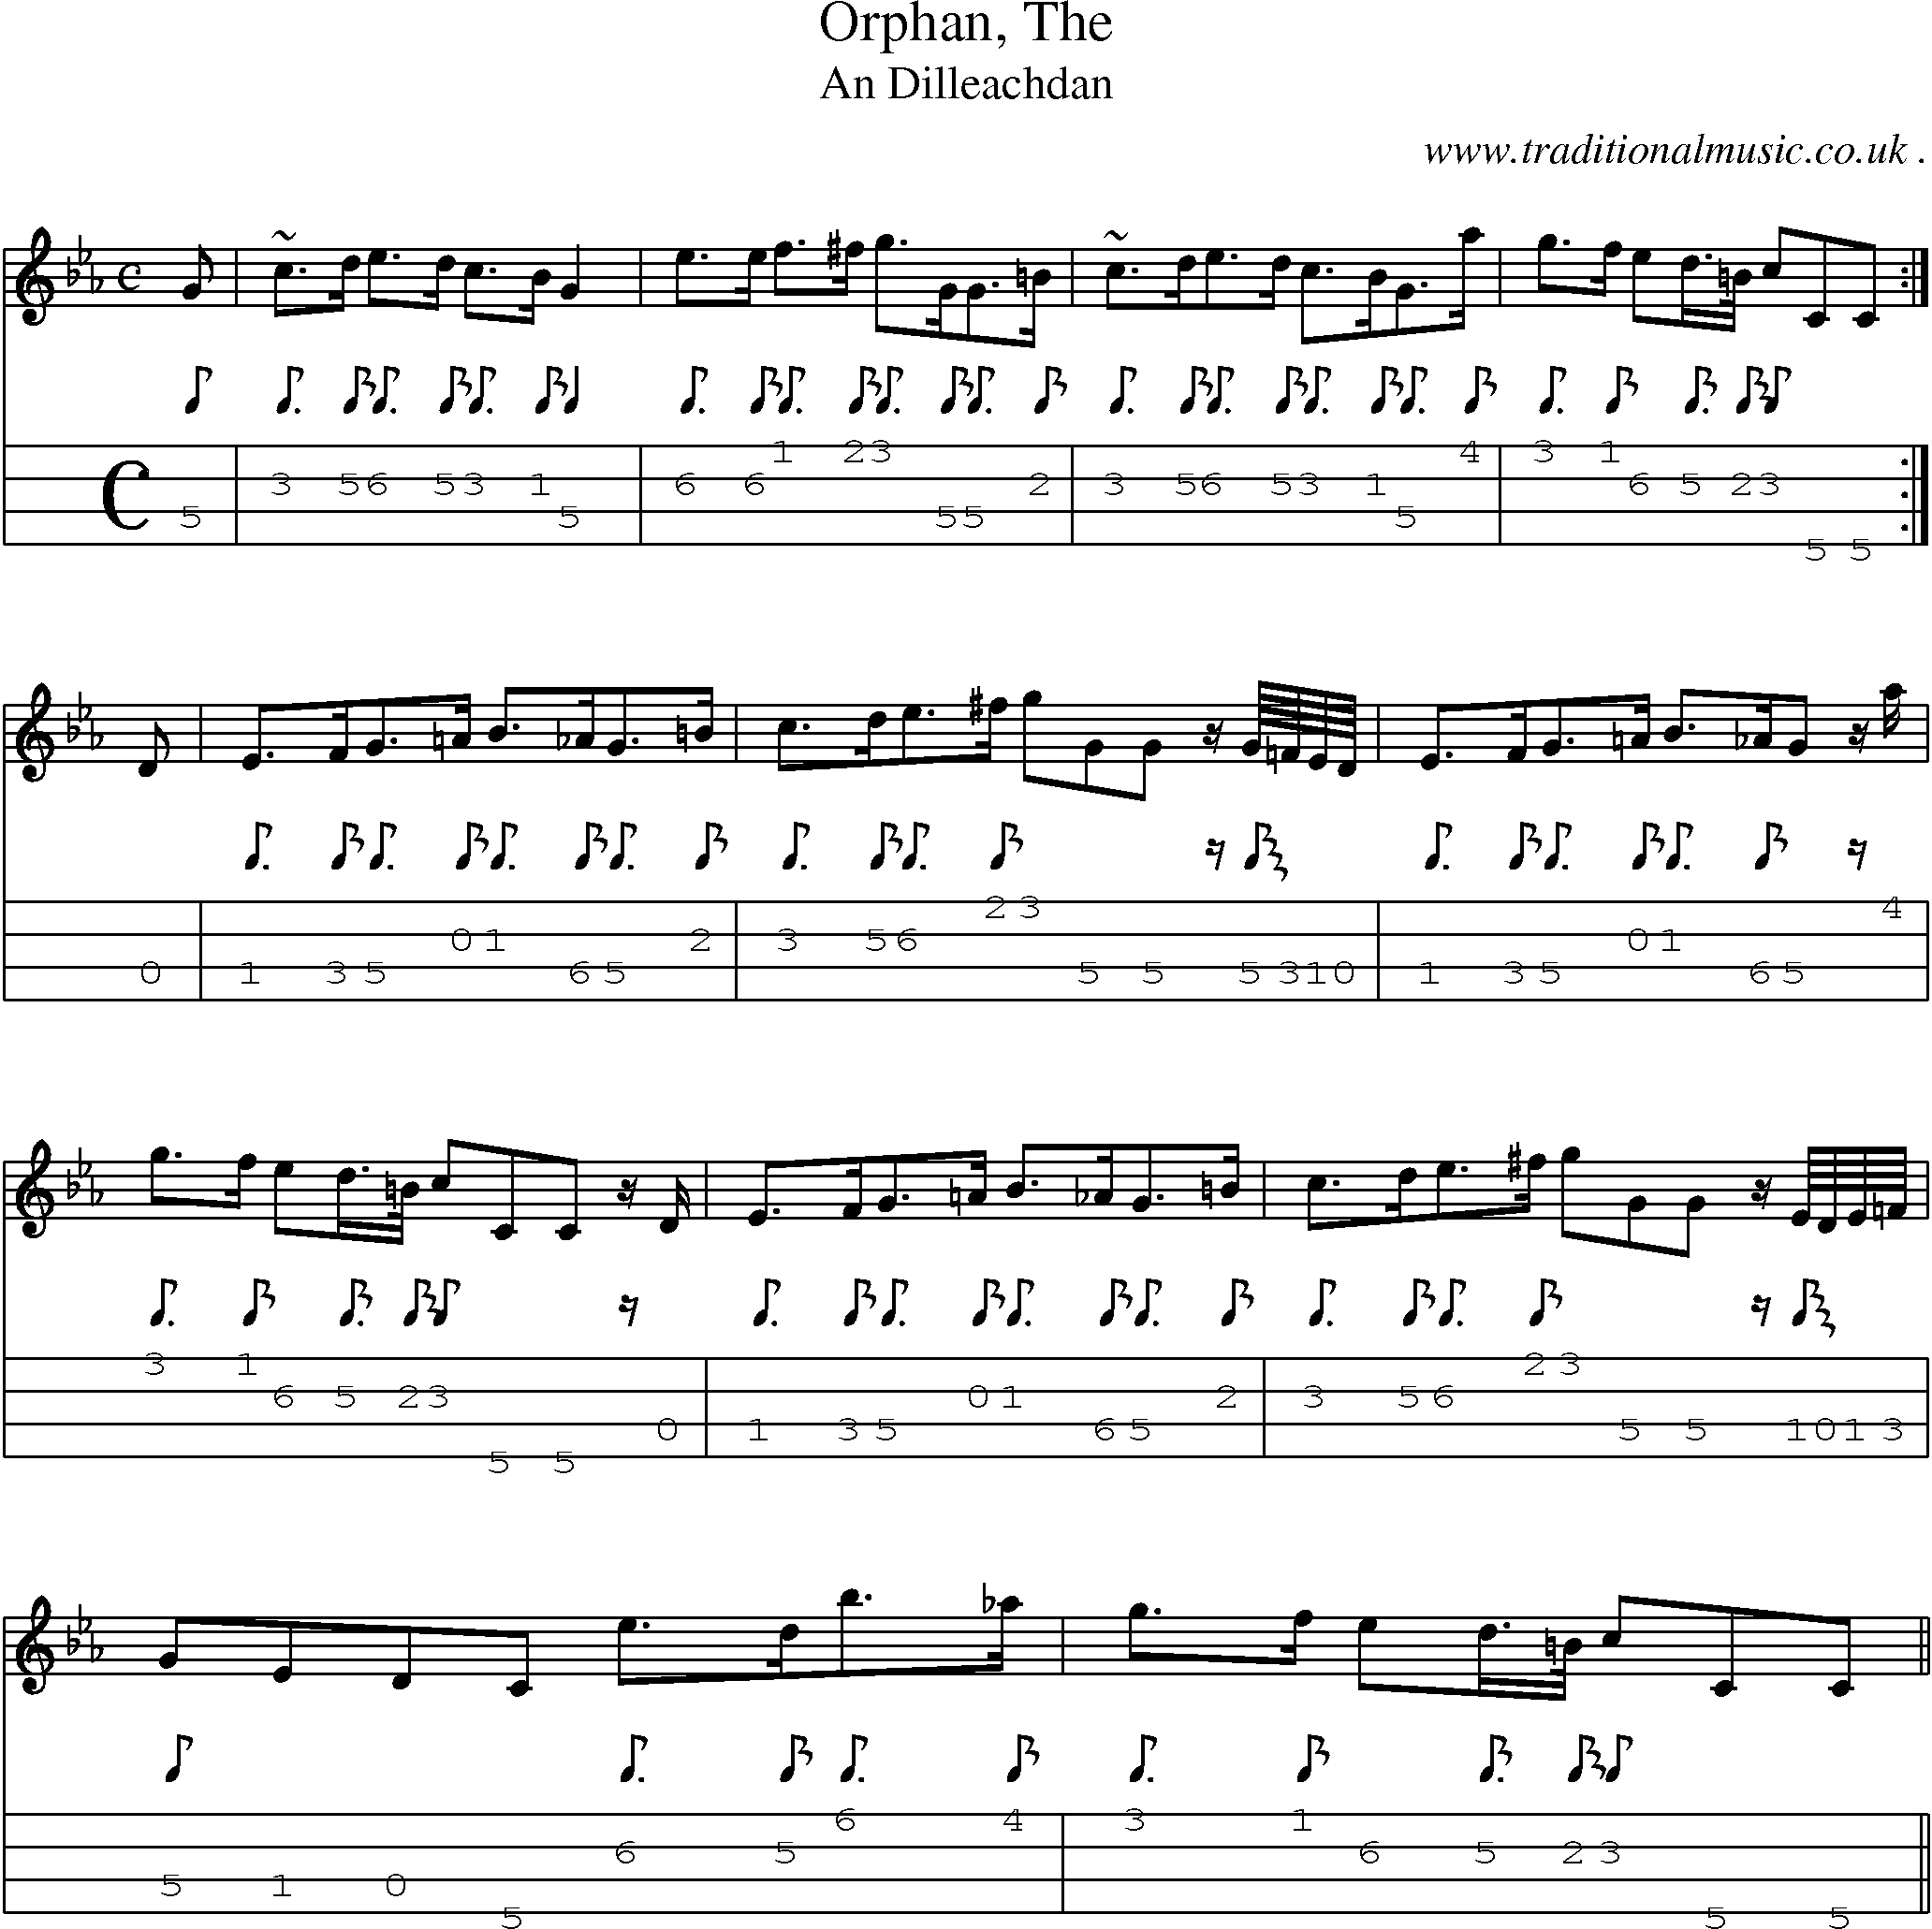 Sheet-music  score, Chords and Mandolin Tabs for Orphan The